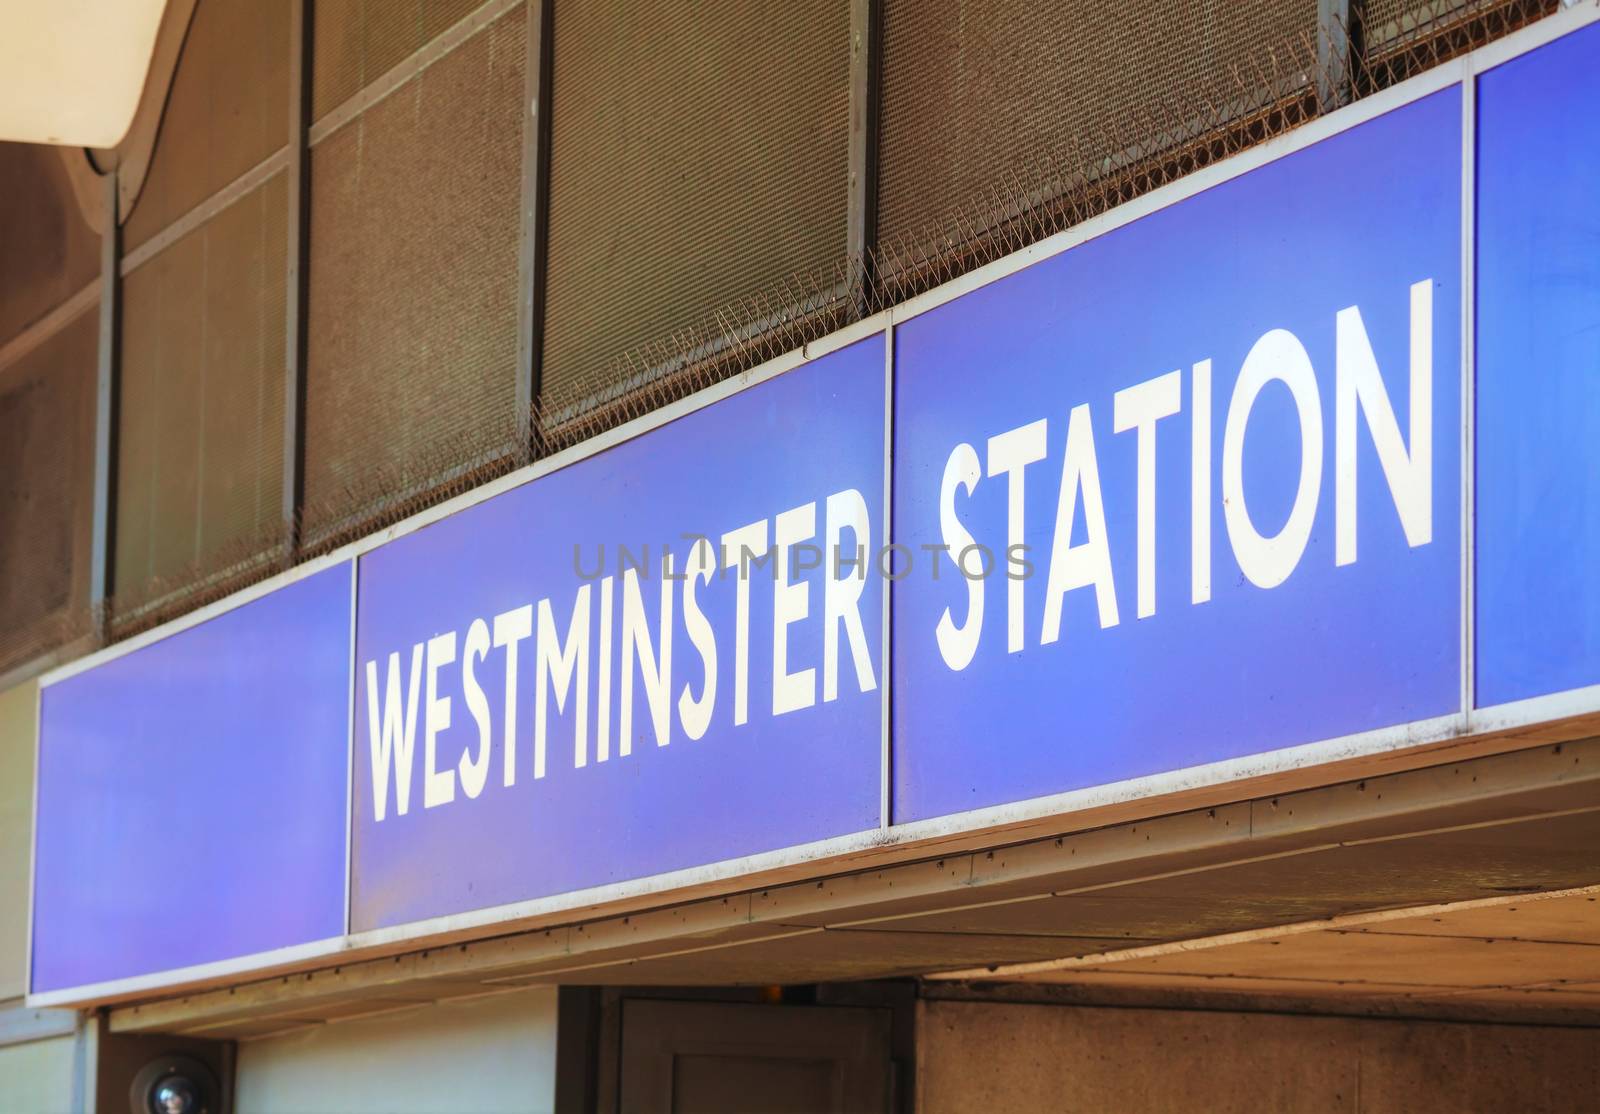 London Westminster underground station sign by AndreyKr